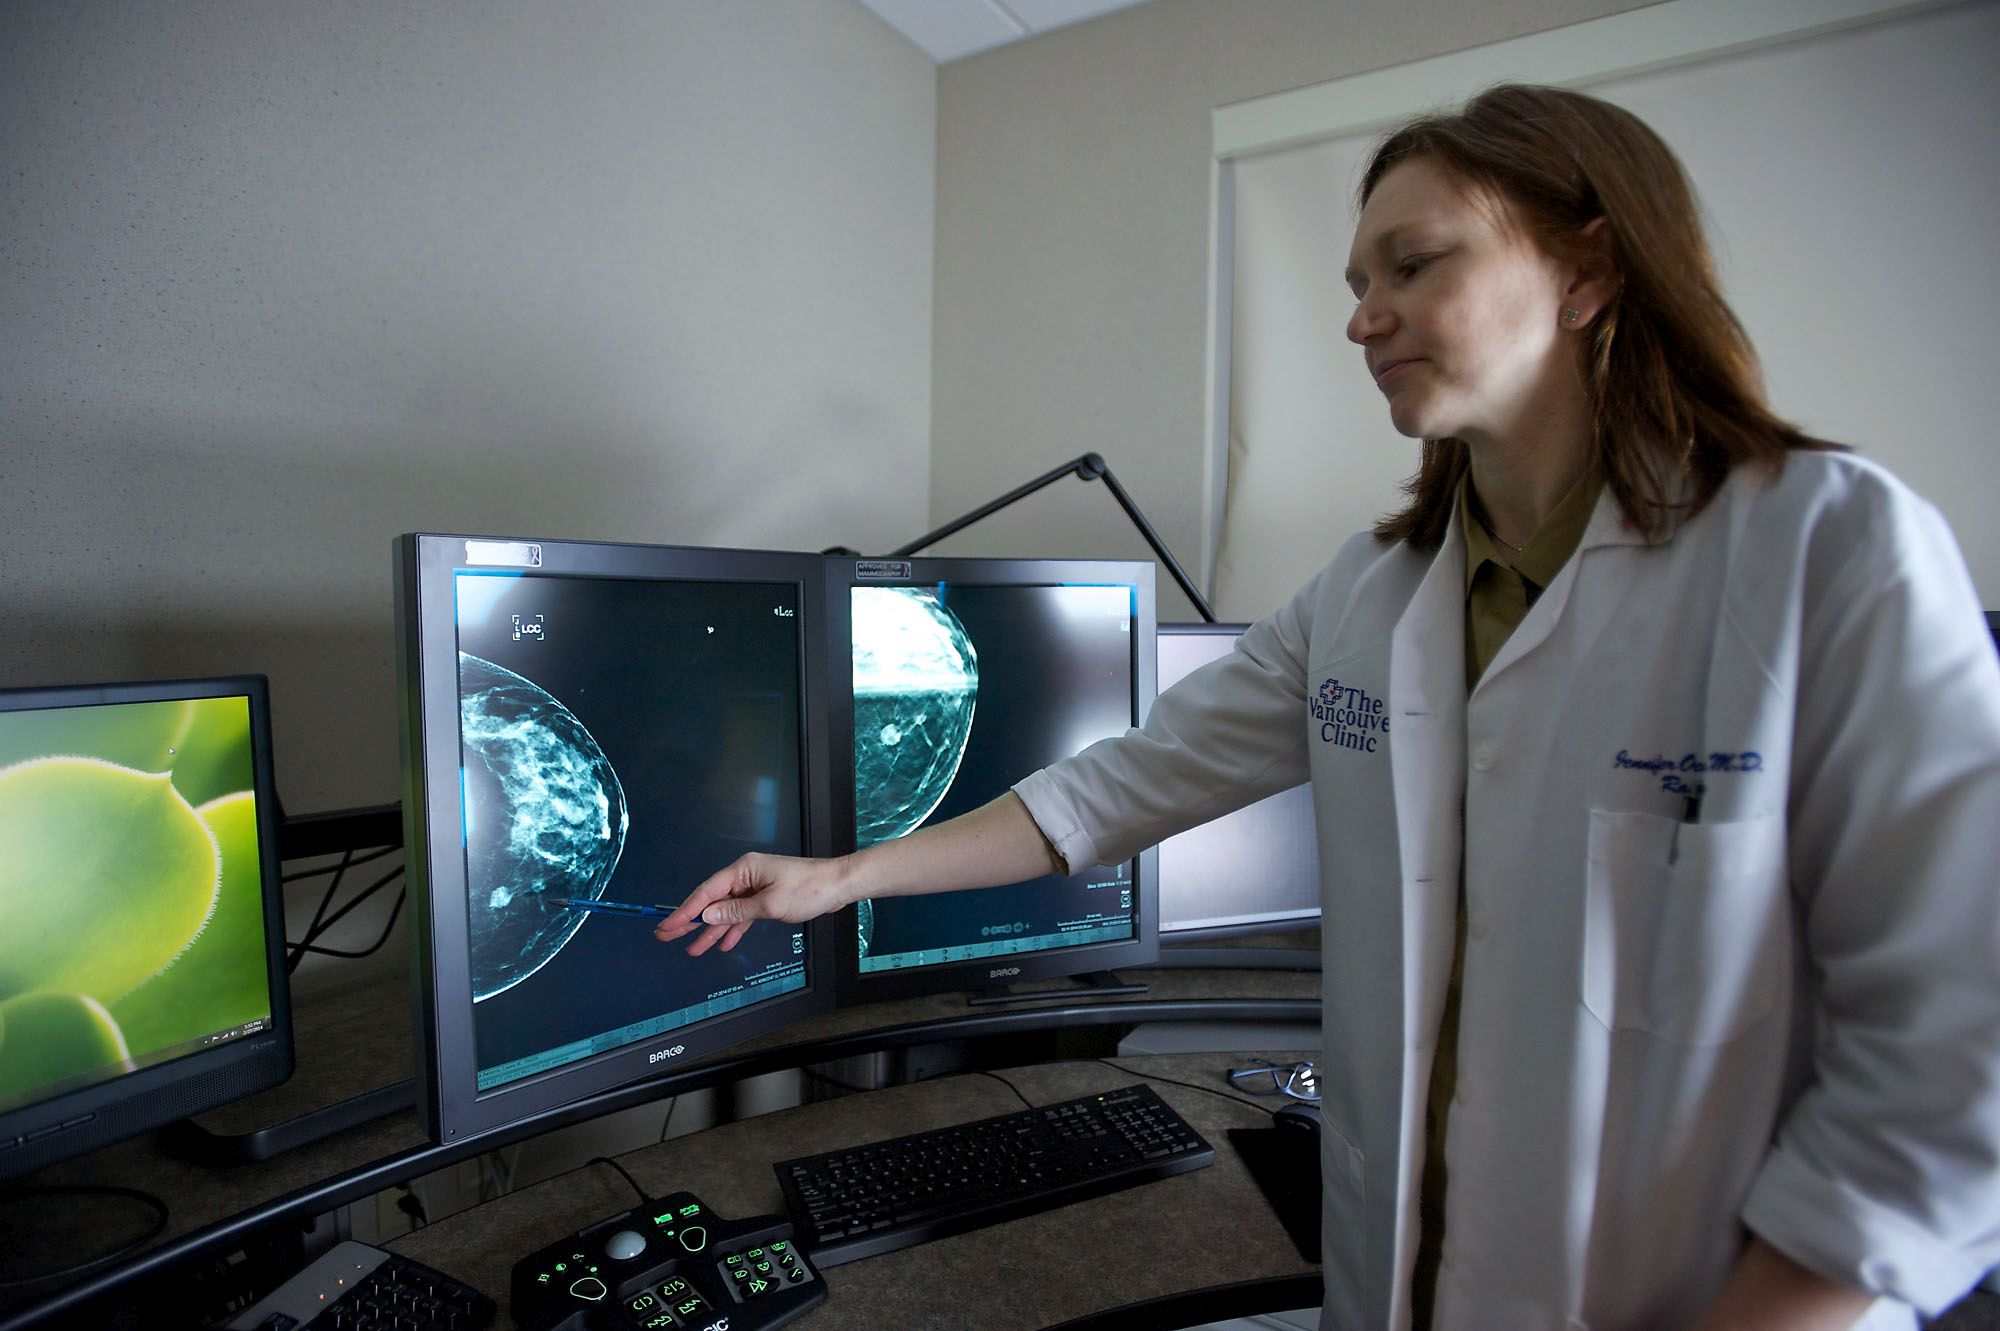 Dr. Jennifer Ochsner, a radiologist at The Vancouver Clinic, reviews the mammogram of a woman who is younger than 50 and was diagnosed with breast cancer.